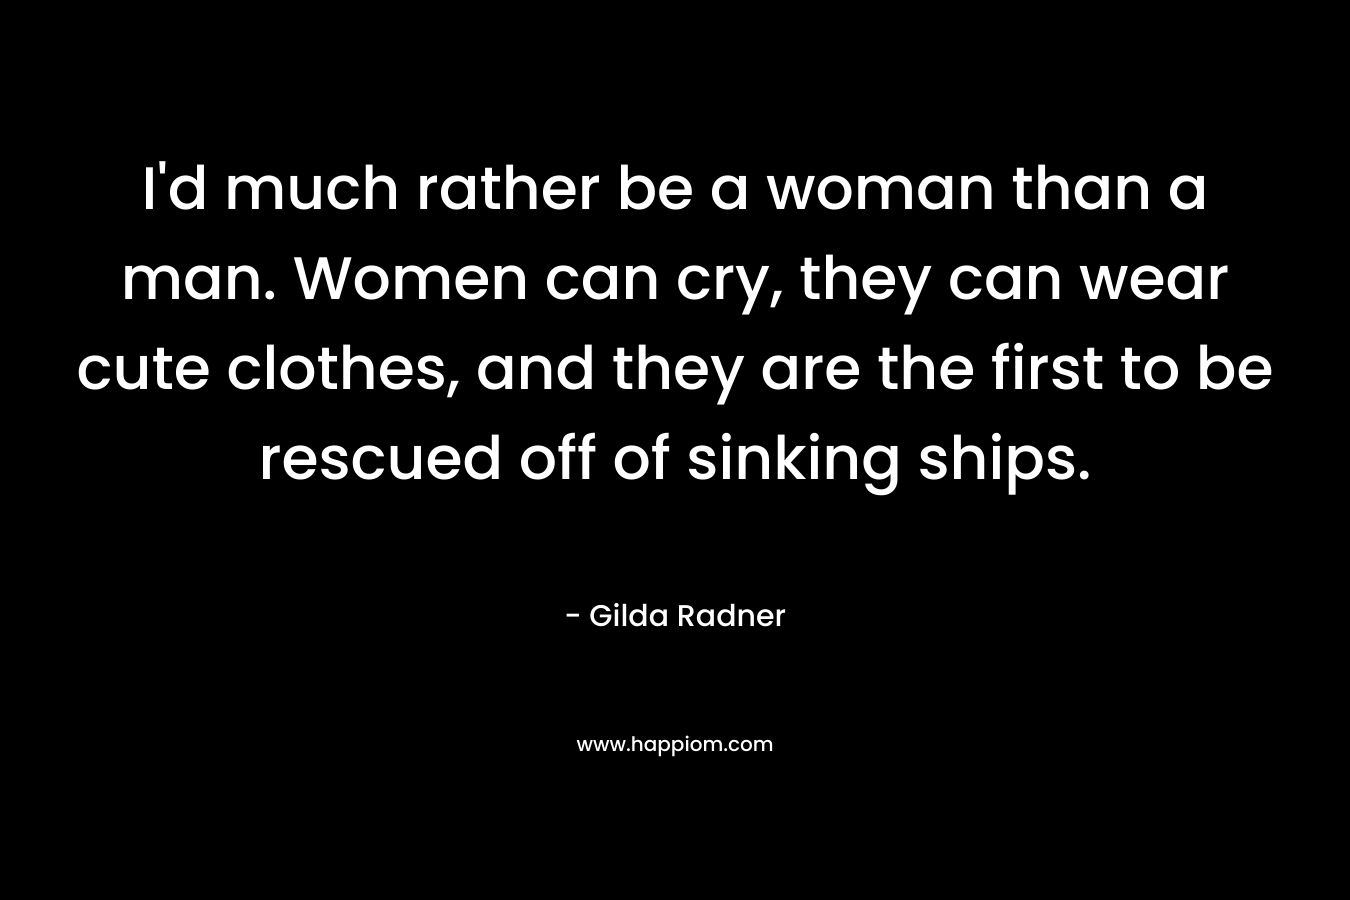 I’d much rather be a woman than a man. Women can cry, they can wear cute clothes, and they are the first to be rescued off of sinking ships. – Gilda Radner